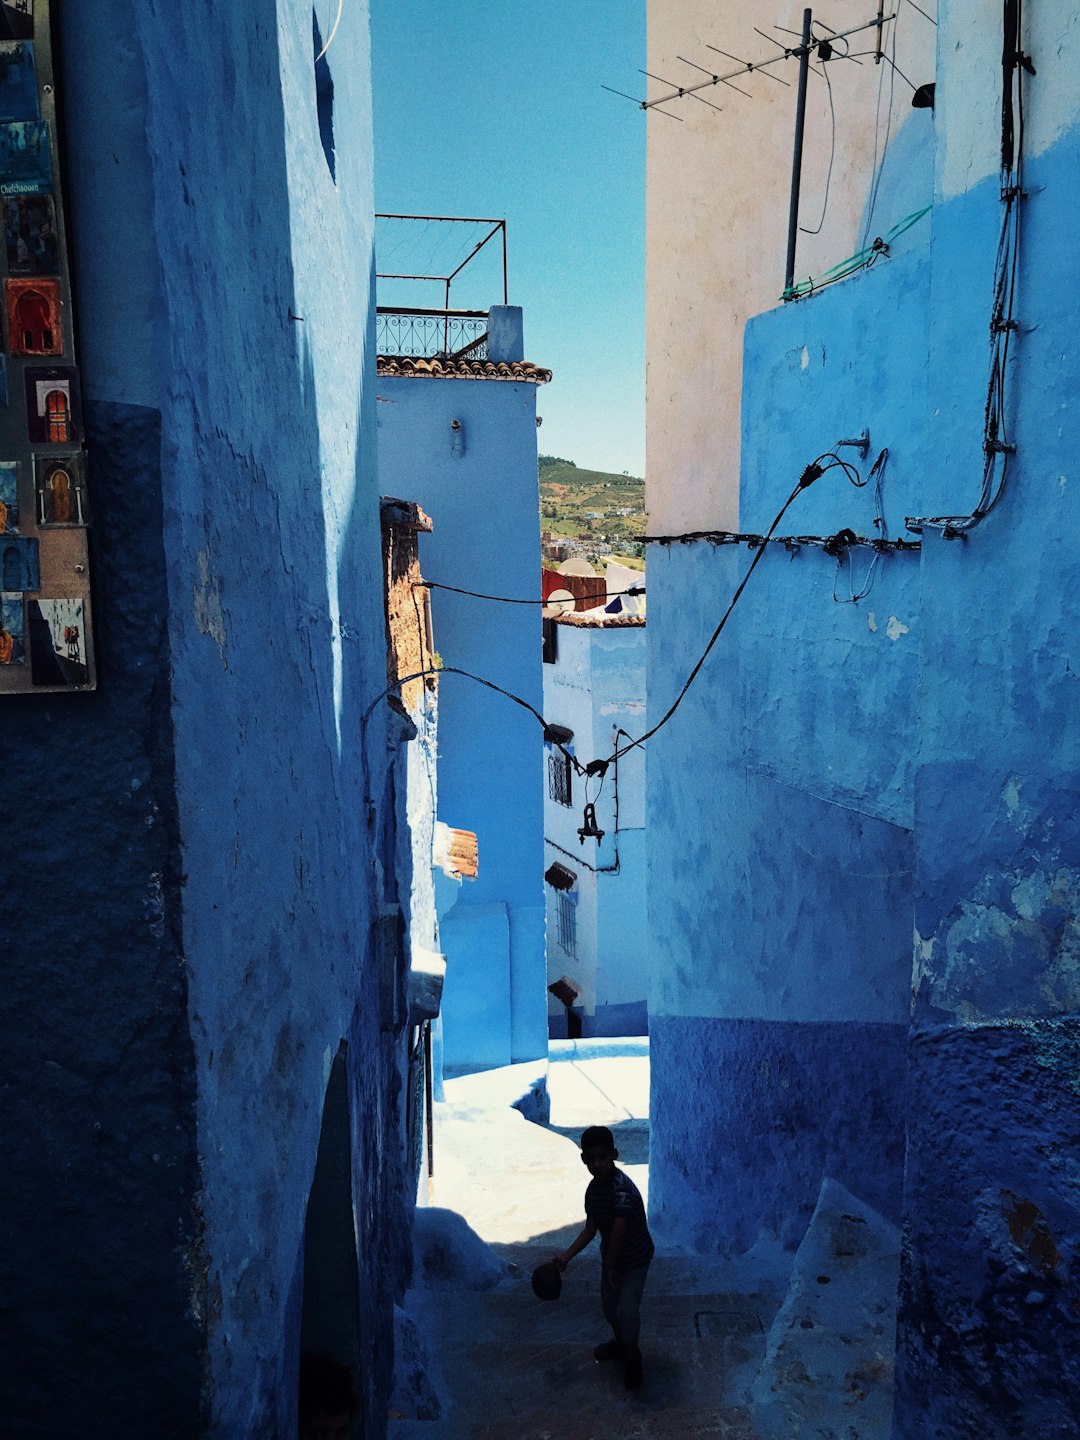 Travel Tips and Stories of Chefchaouen in Morocco